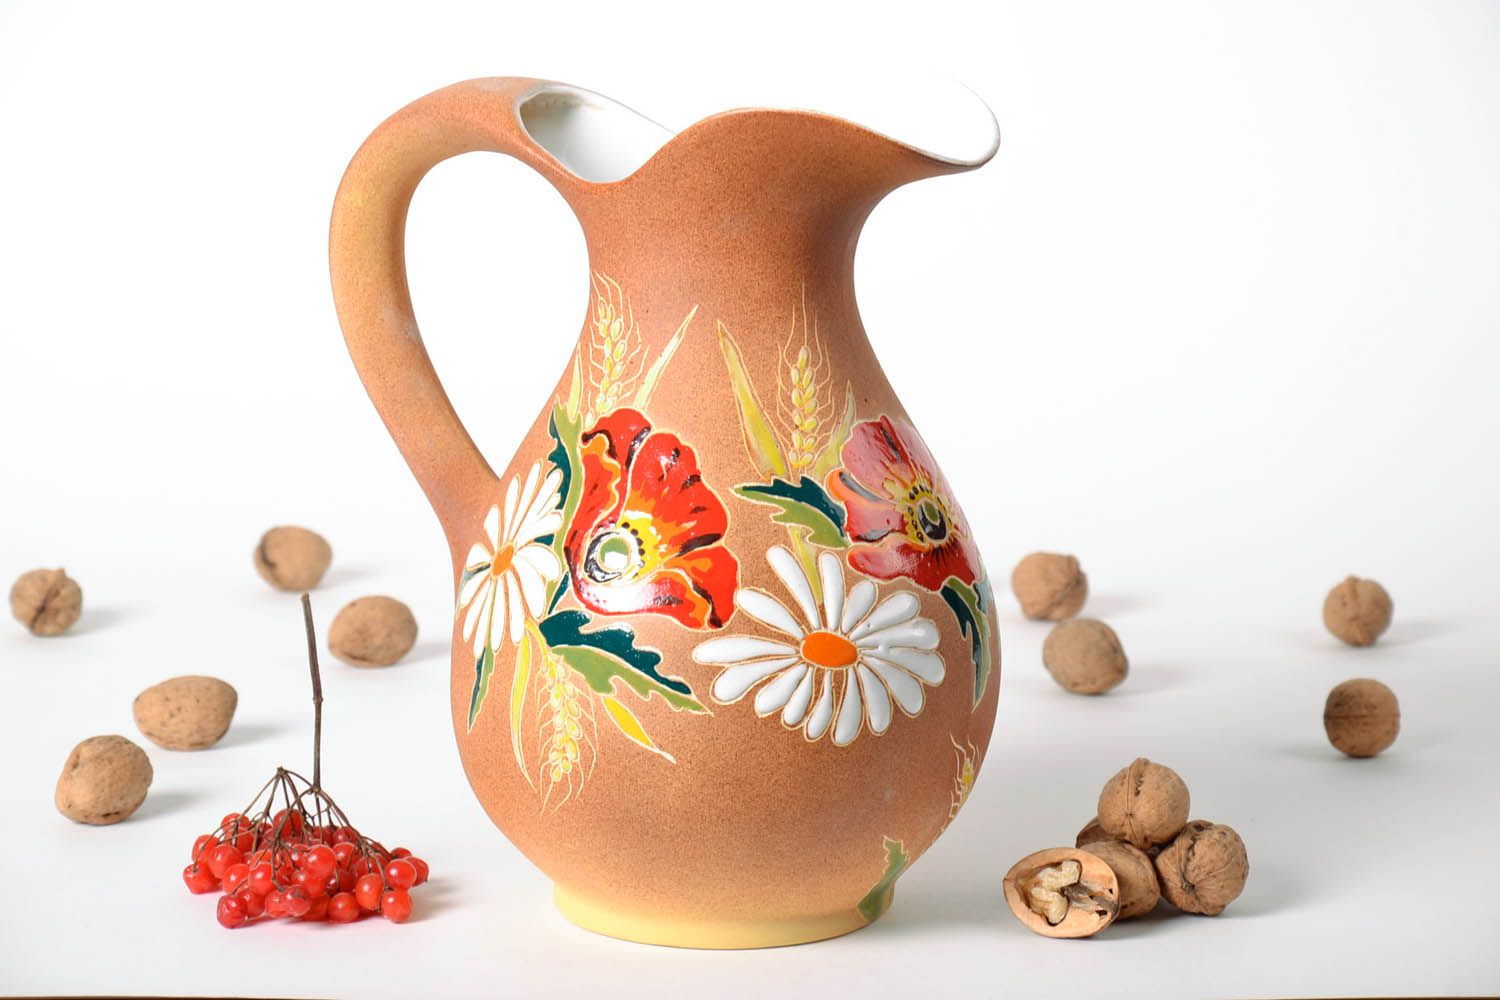 100 oz ceramic handmade water pitcher jug with handle and floral décor 4 lb photo 1